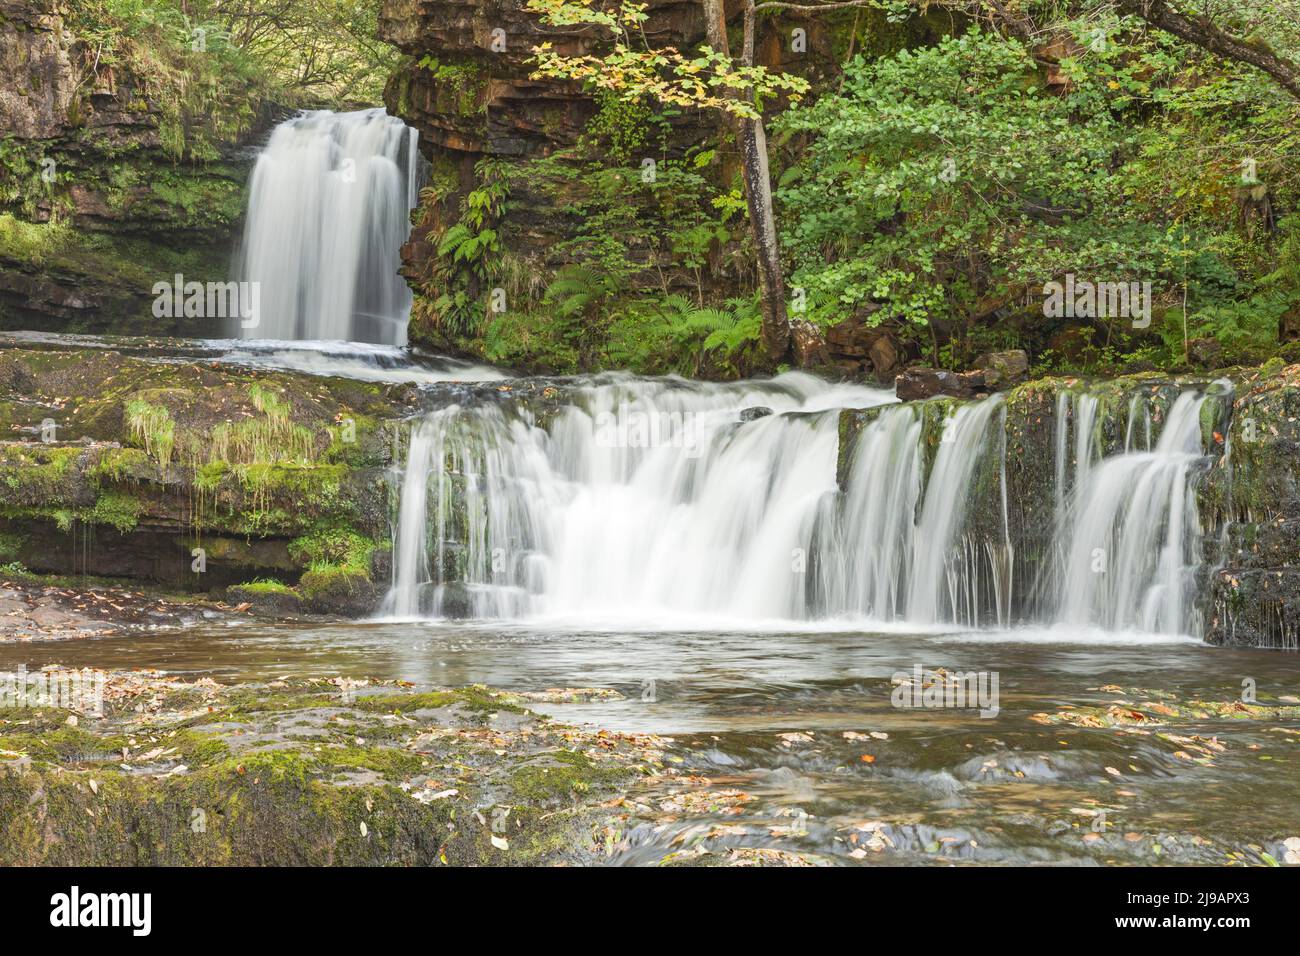 Sgwd Ddwli Isaf (Lower Gushing Falls) on River Nedd Fechan, between Pont Melin-fach and Pontneddfechan, Brecon Beacons National Park, South Wales, UK Stock Photo